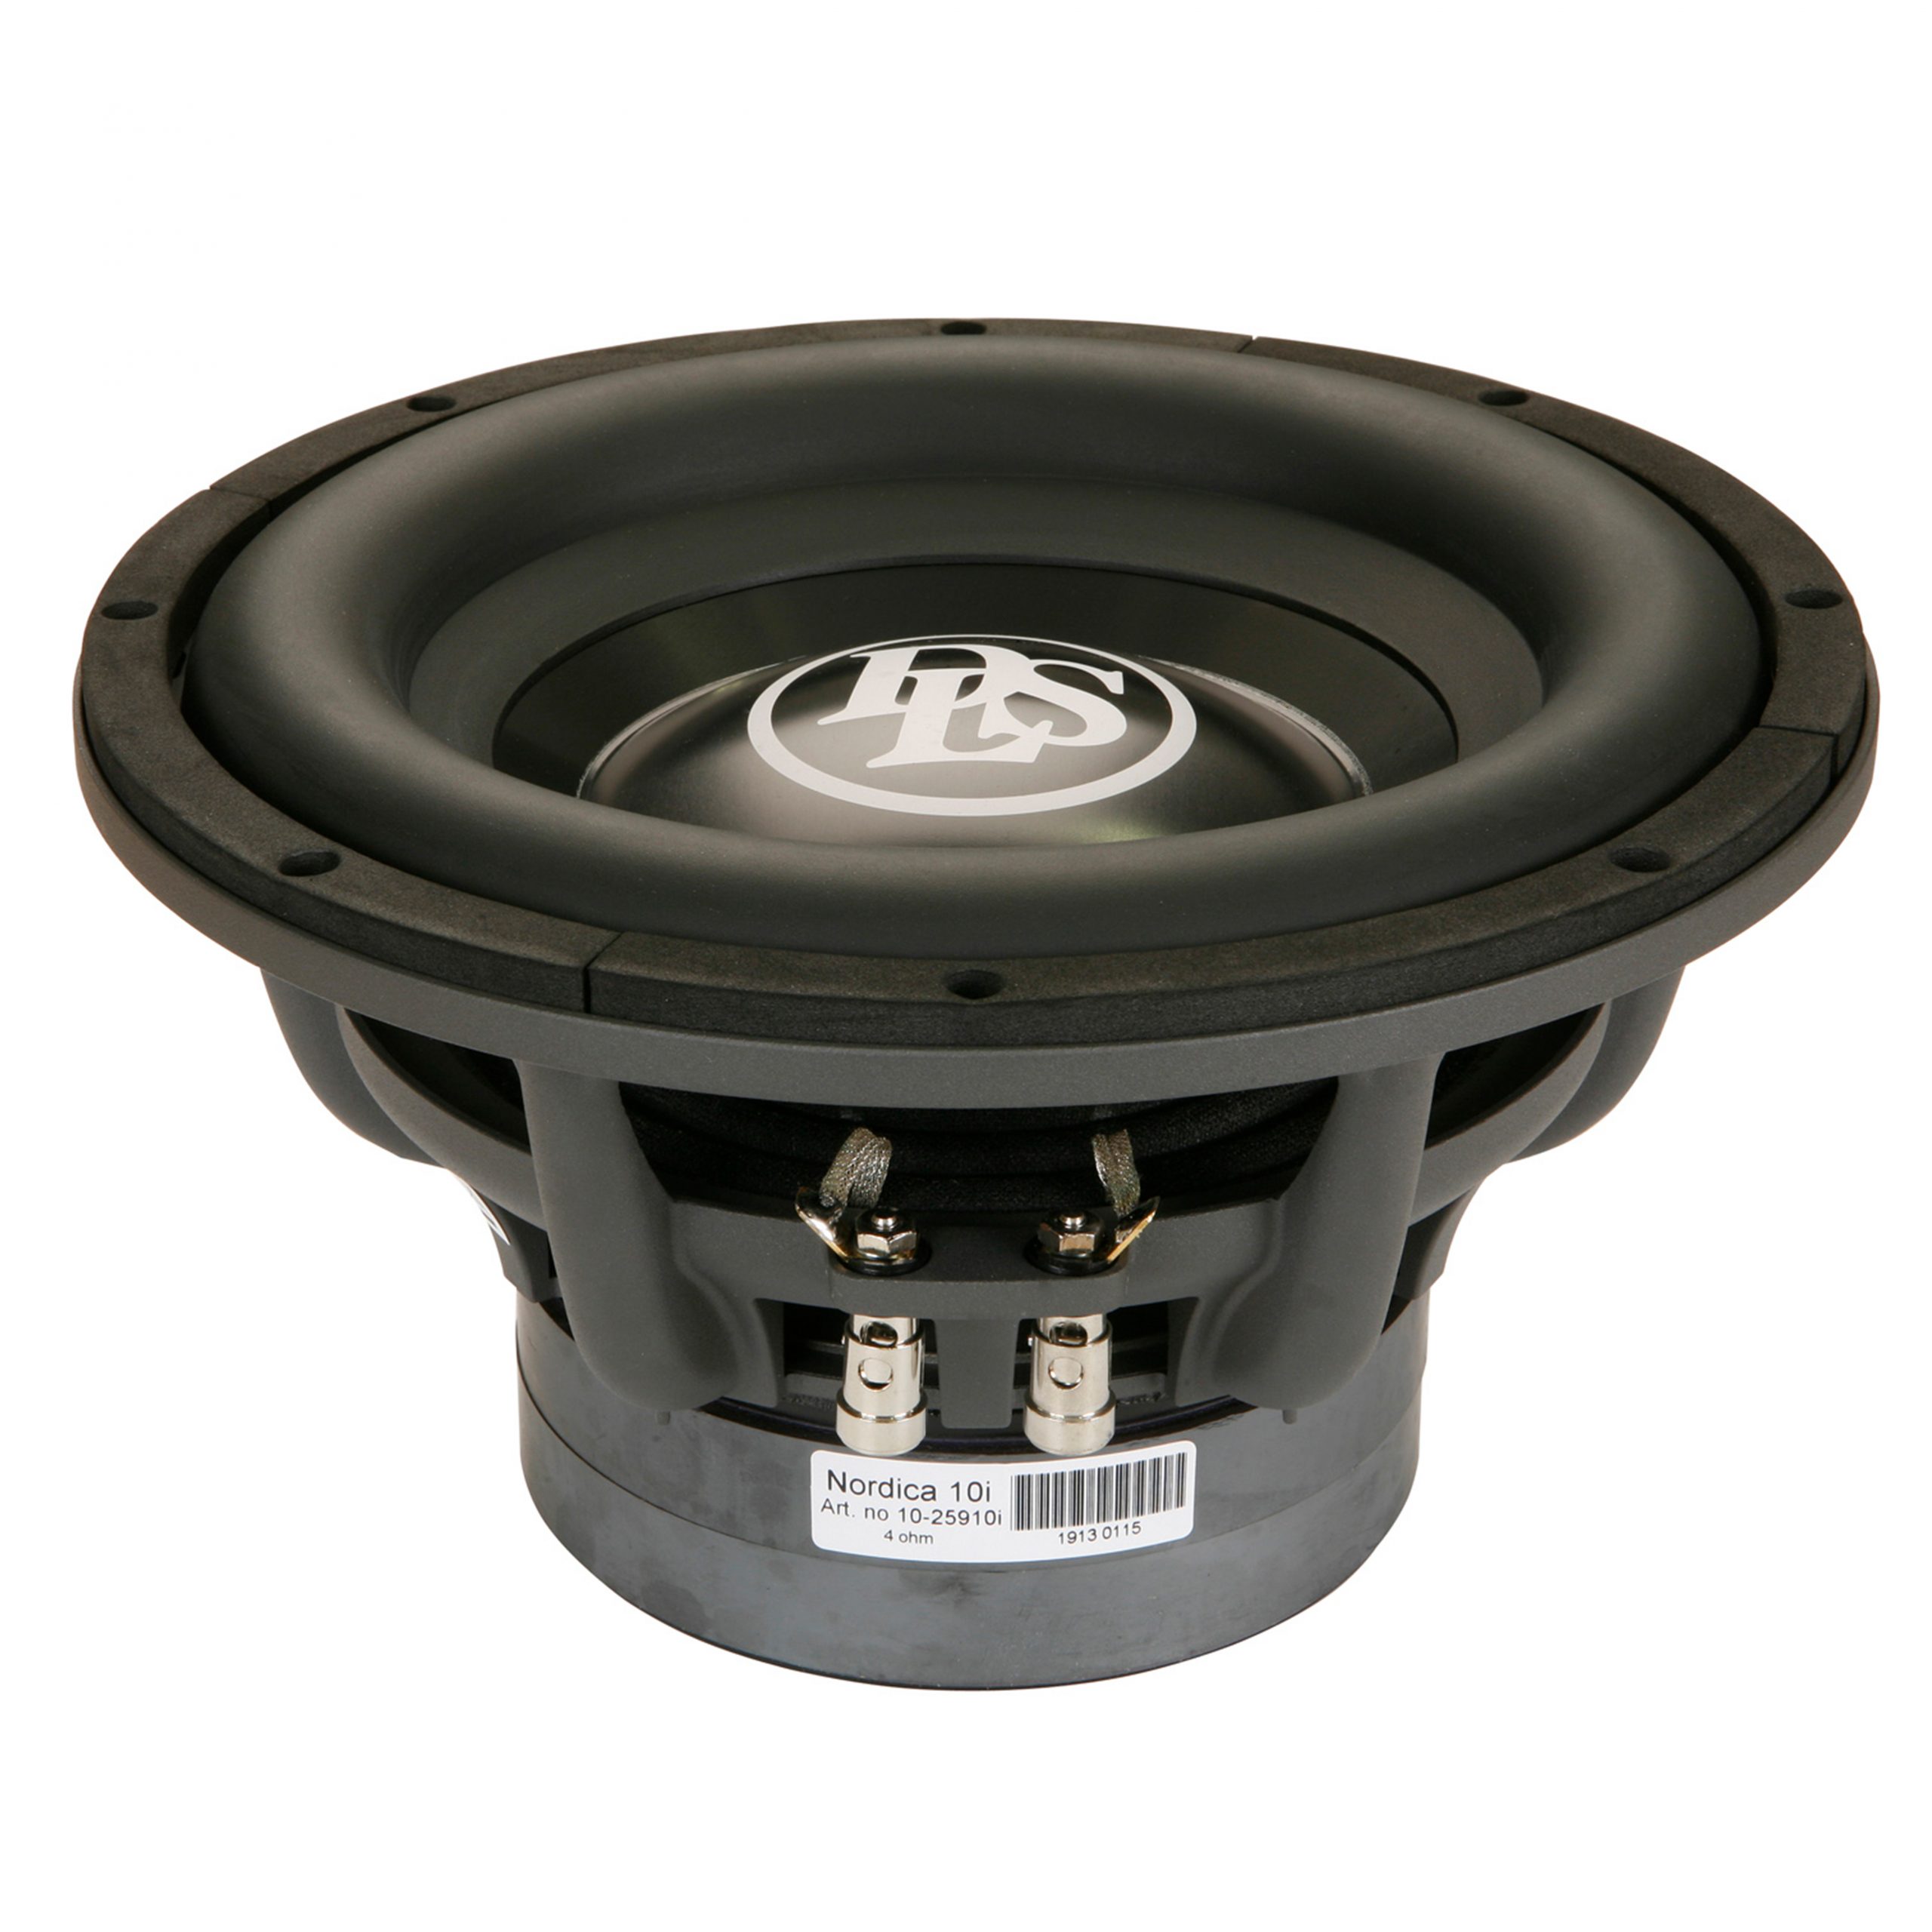 dls 12 subwoofer - OFF-51% > Shipping free